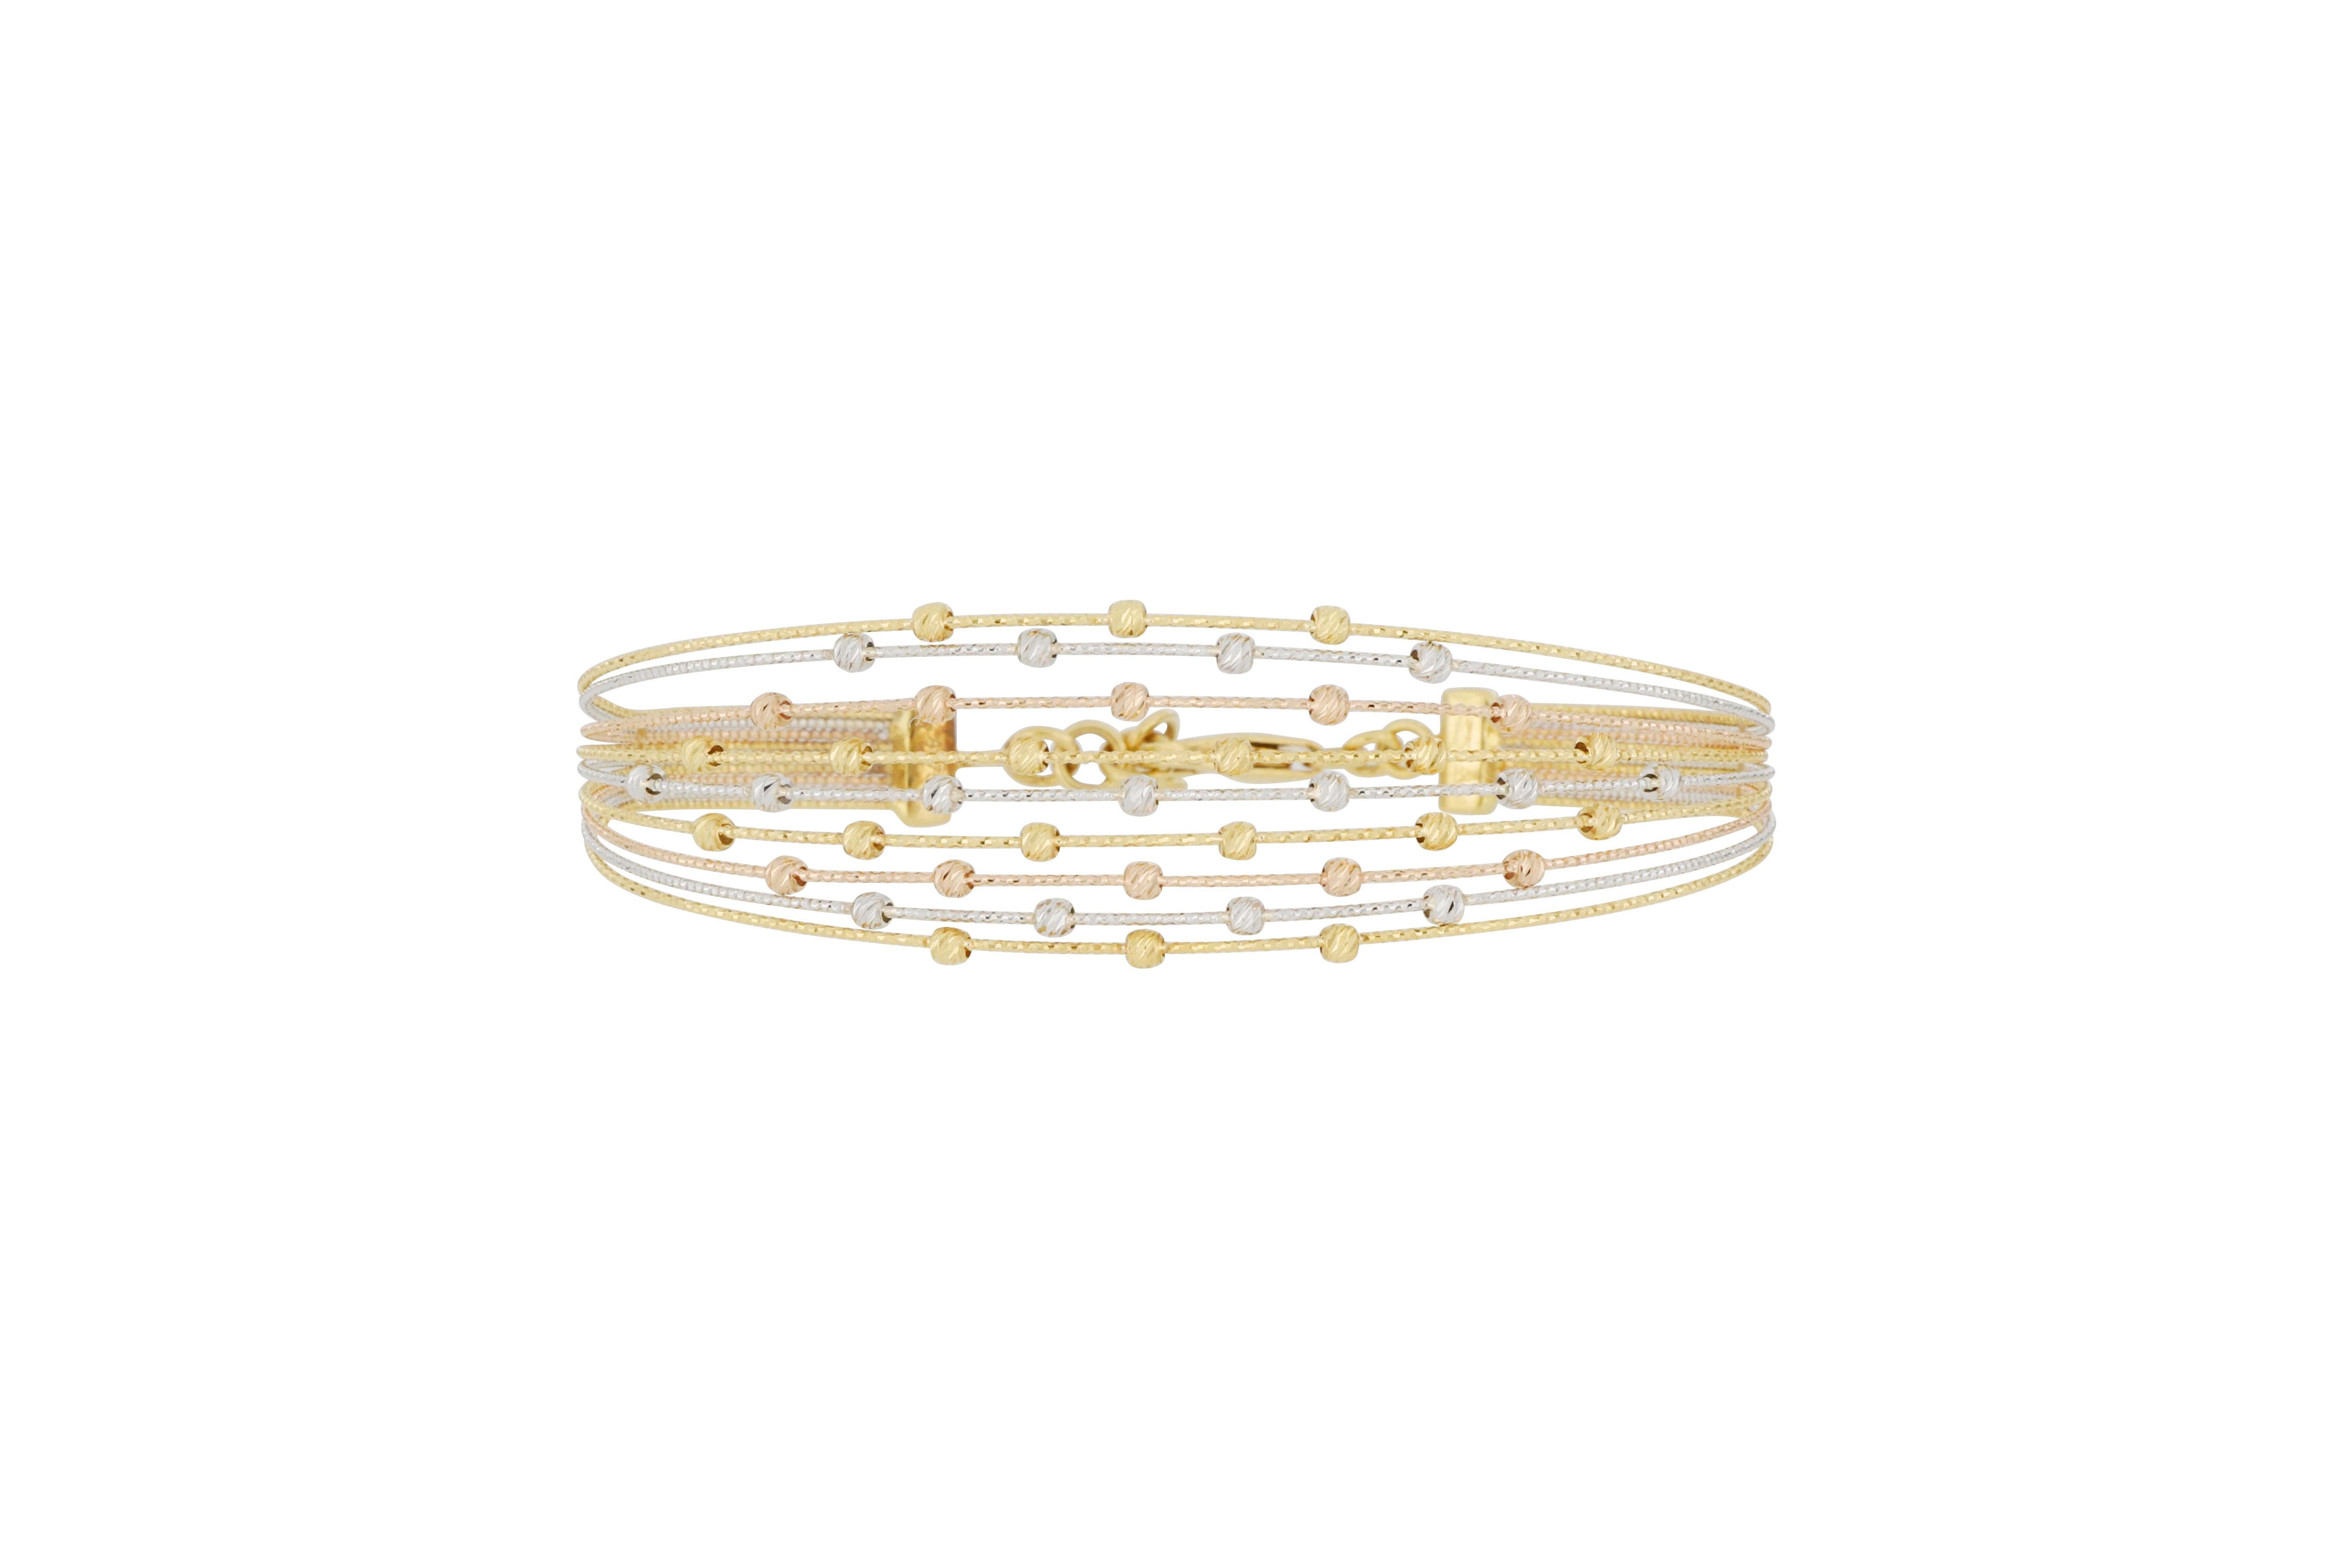 This beautiful Italian jewellery is made of 18K gold, decorated with cut beads in three colours, stitched into a sparkling bangle with graceful fine gold threads, casual and stylish, suitable for everyday wear. The bangle can also be adjusted to